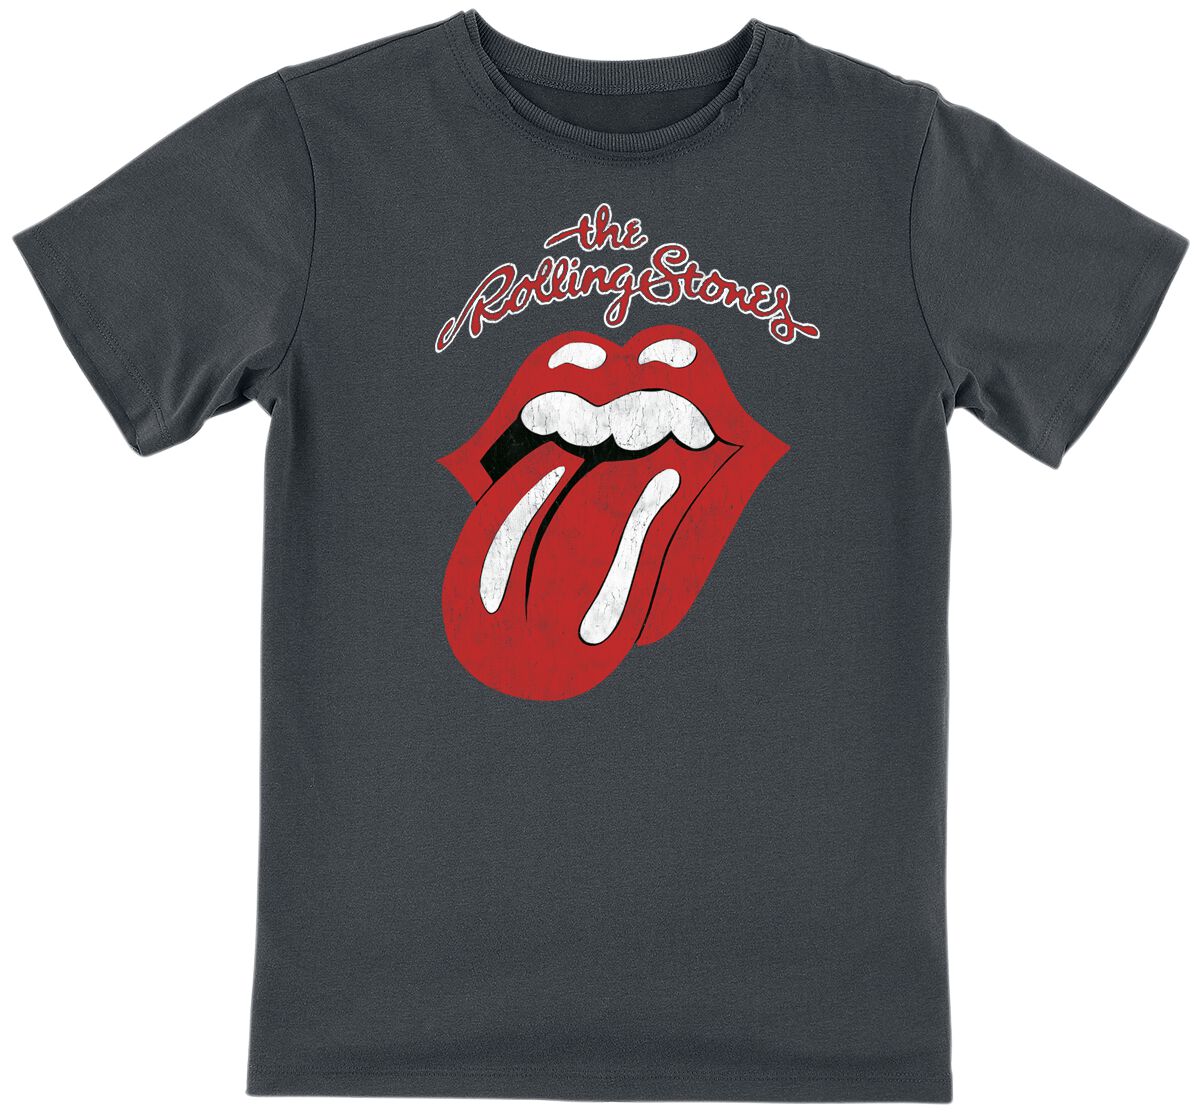 The Rolling Stones - Amplified Collection - Square Tongue - T-Shirt - charcoal